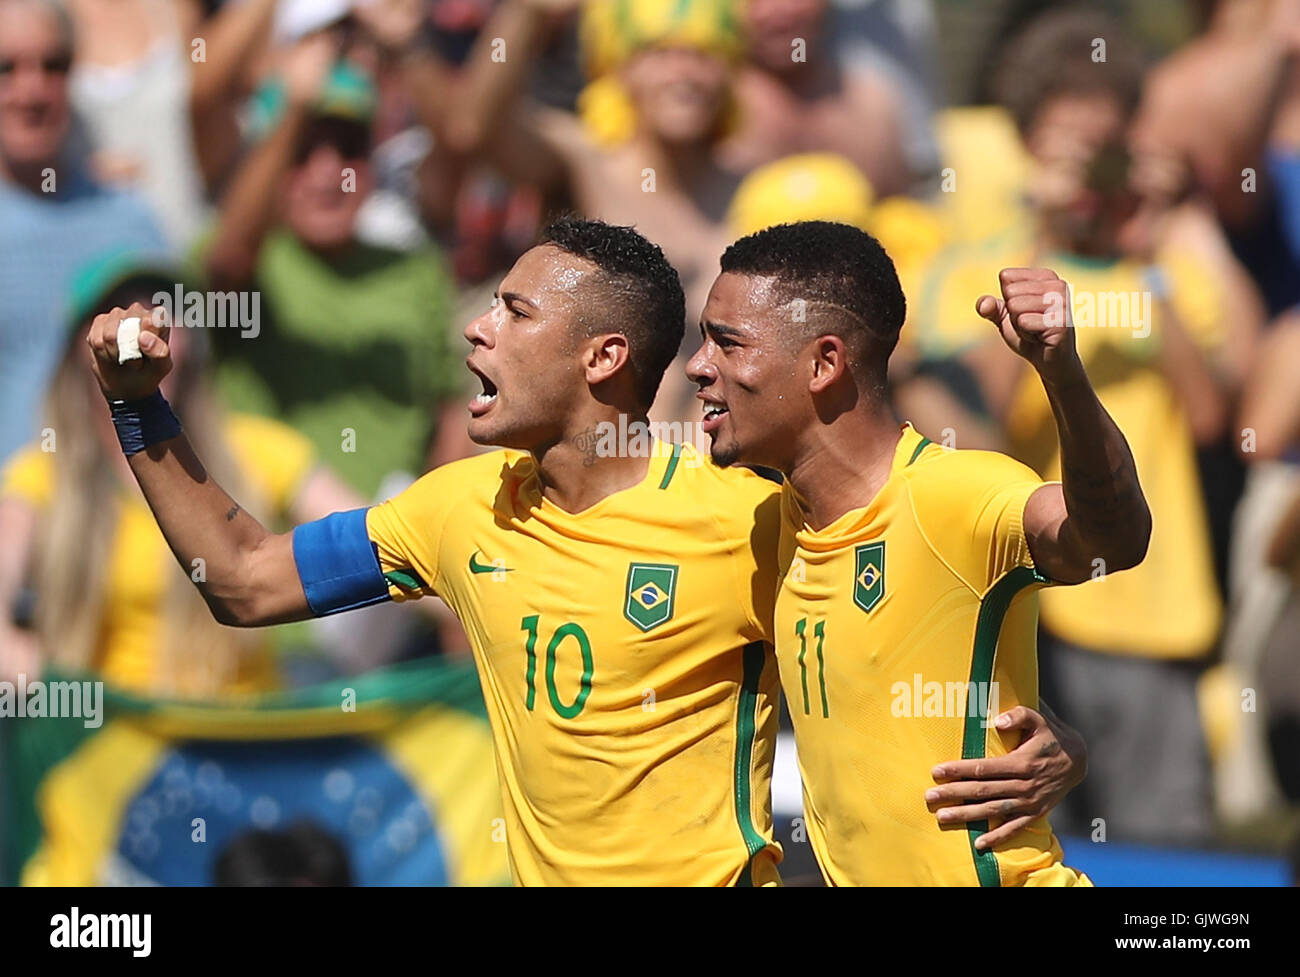 Rio De Janeiro, Brazil. 17th Aug, 2016. Brazil's Neymar (L) and Jesus Gabriel celebrate during the men's football semifinal between Brazil and Honduras at the 2016 Rio Olympic Games in Rio de Janeiro, Brazil, on Aug. 17, 2016. Brazil won the match with 6:0. Credit:  Cao Can/Xinhua/Alamy Live News Stock Photo